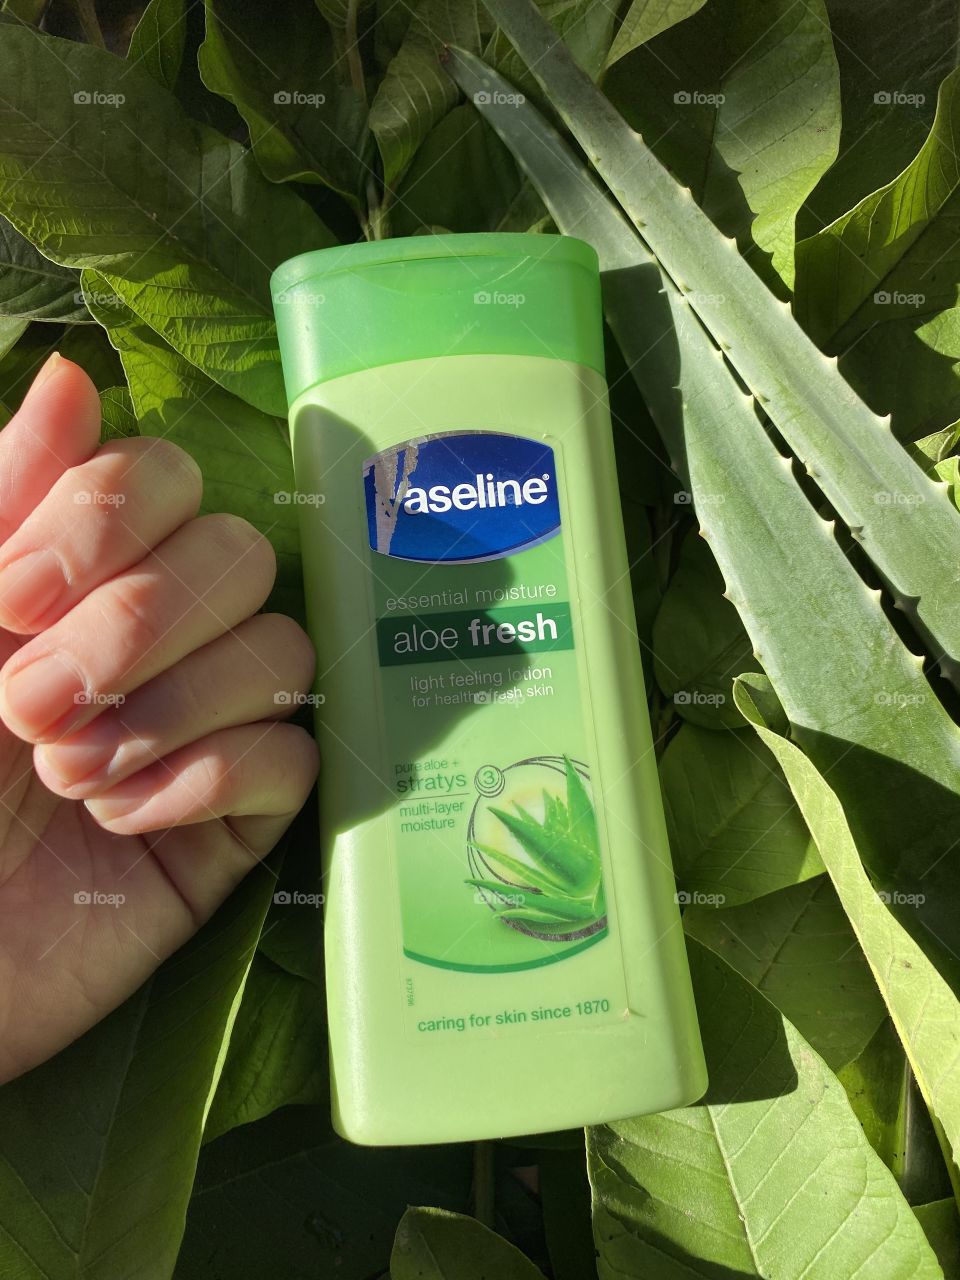 Skin care and nourishing with Vaseline lotion